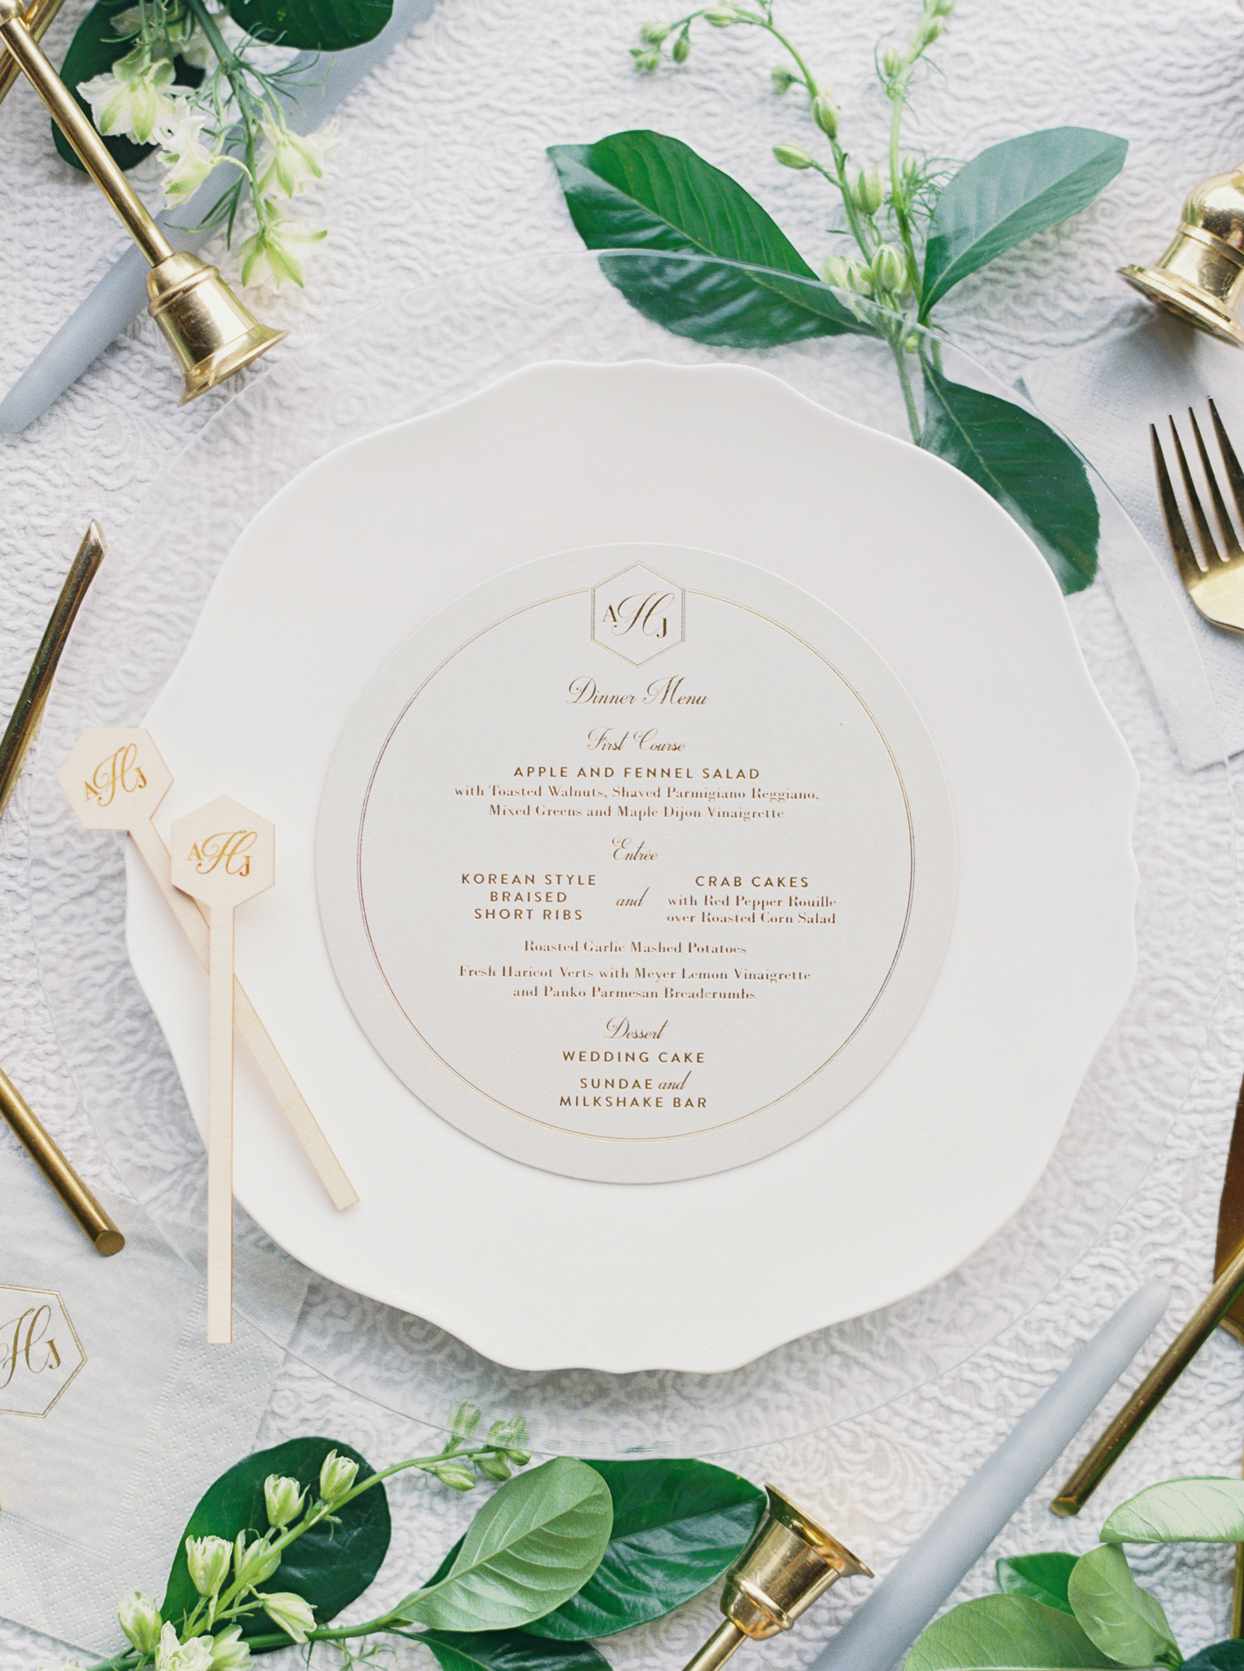 wedding reception menu with gold writing on white place setting with greenery accents